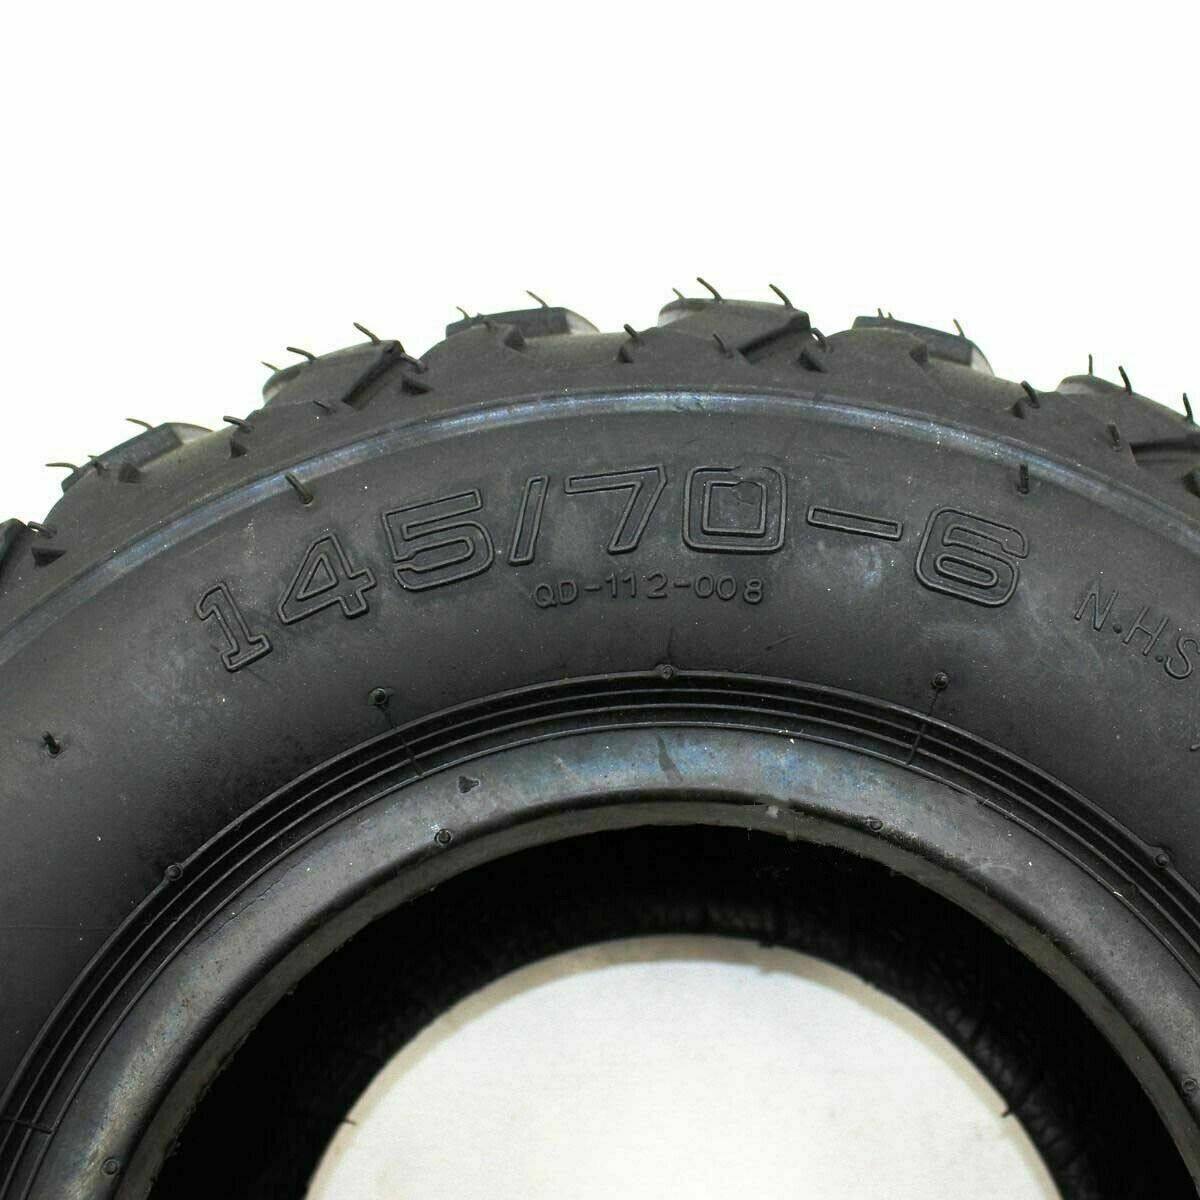 4pcs 4ply 145/70-6" inch Front Rear Tyres Tires For Quad ATV Buggy Bike - TDRMOTO